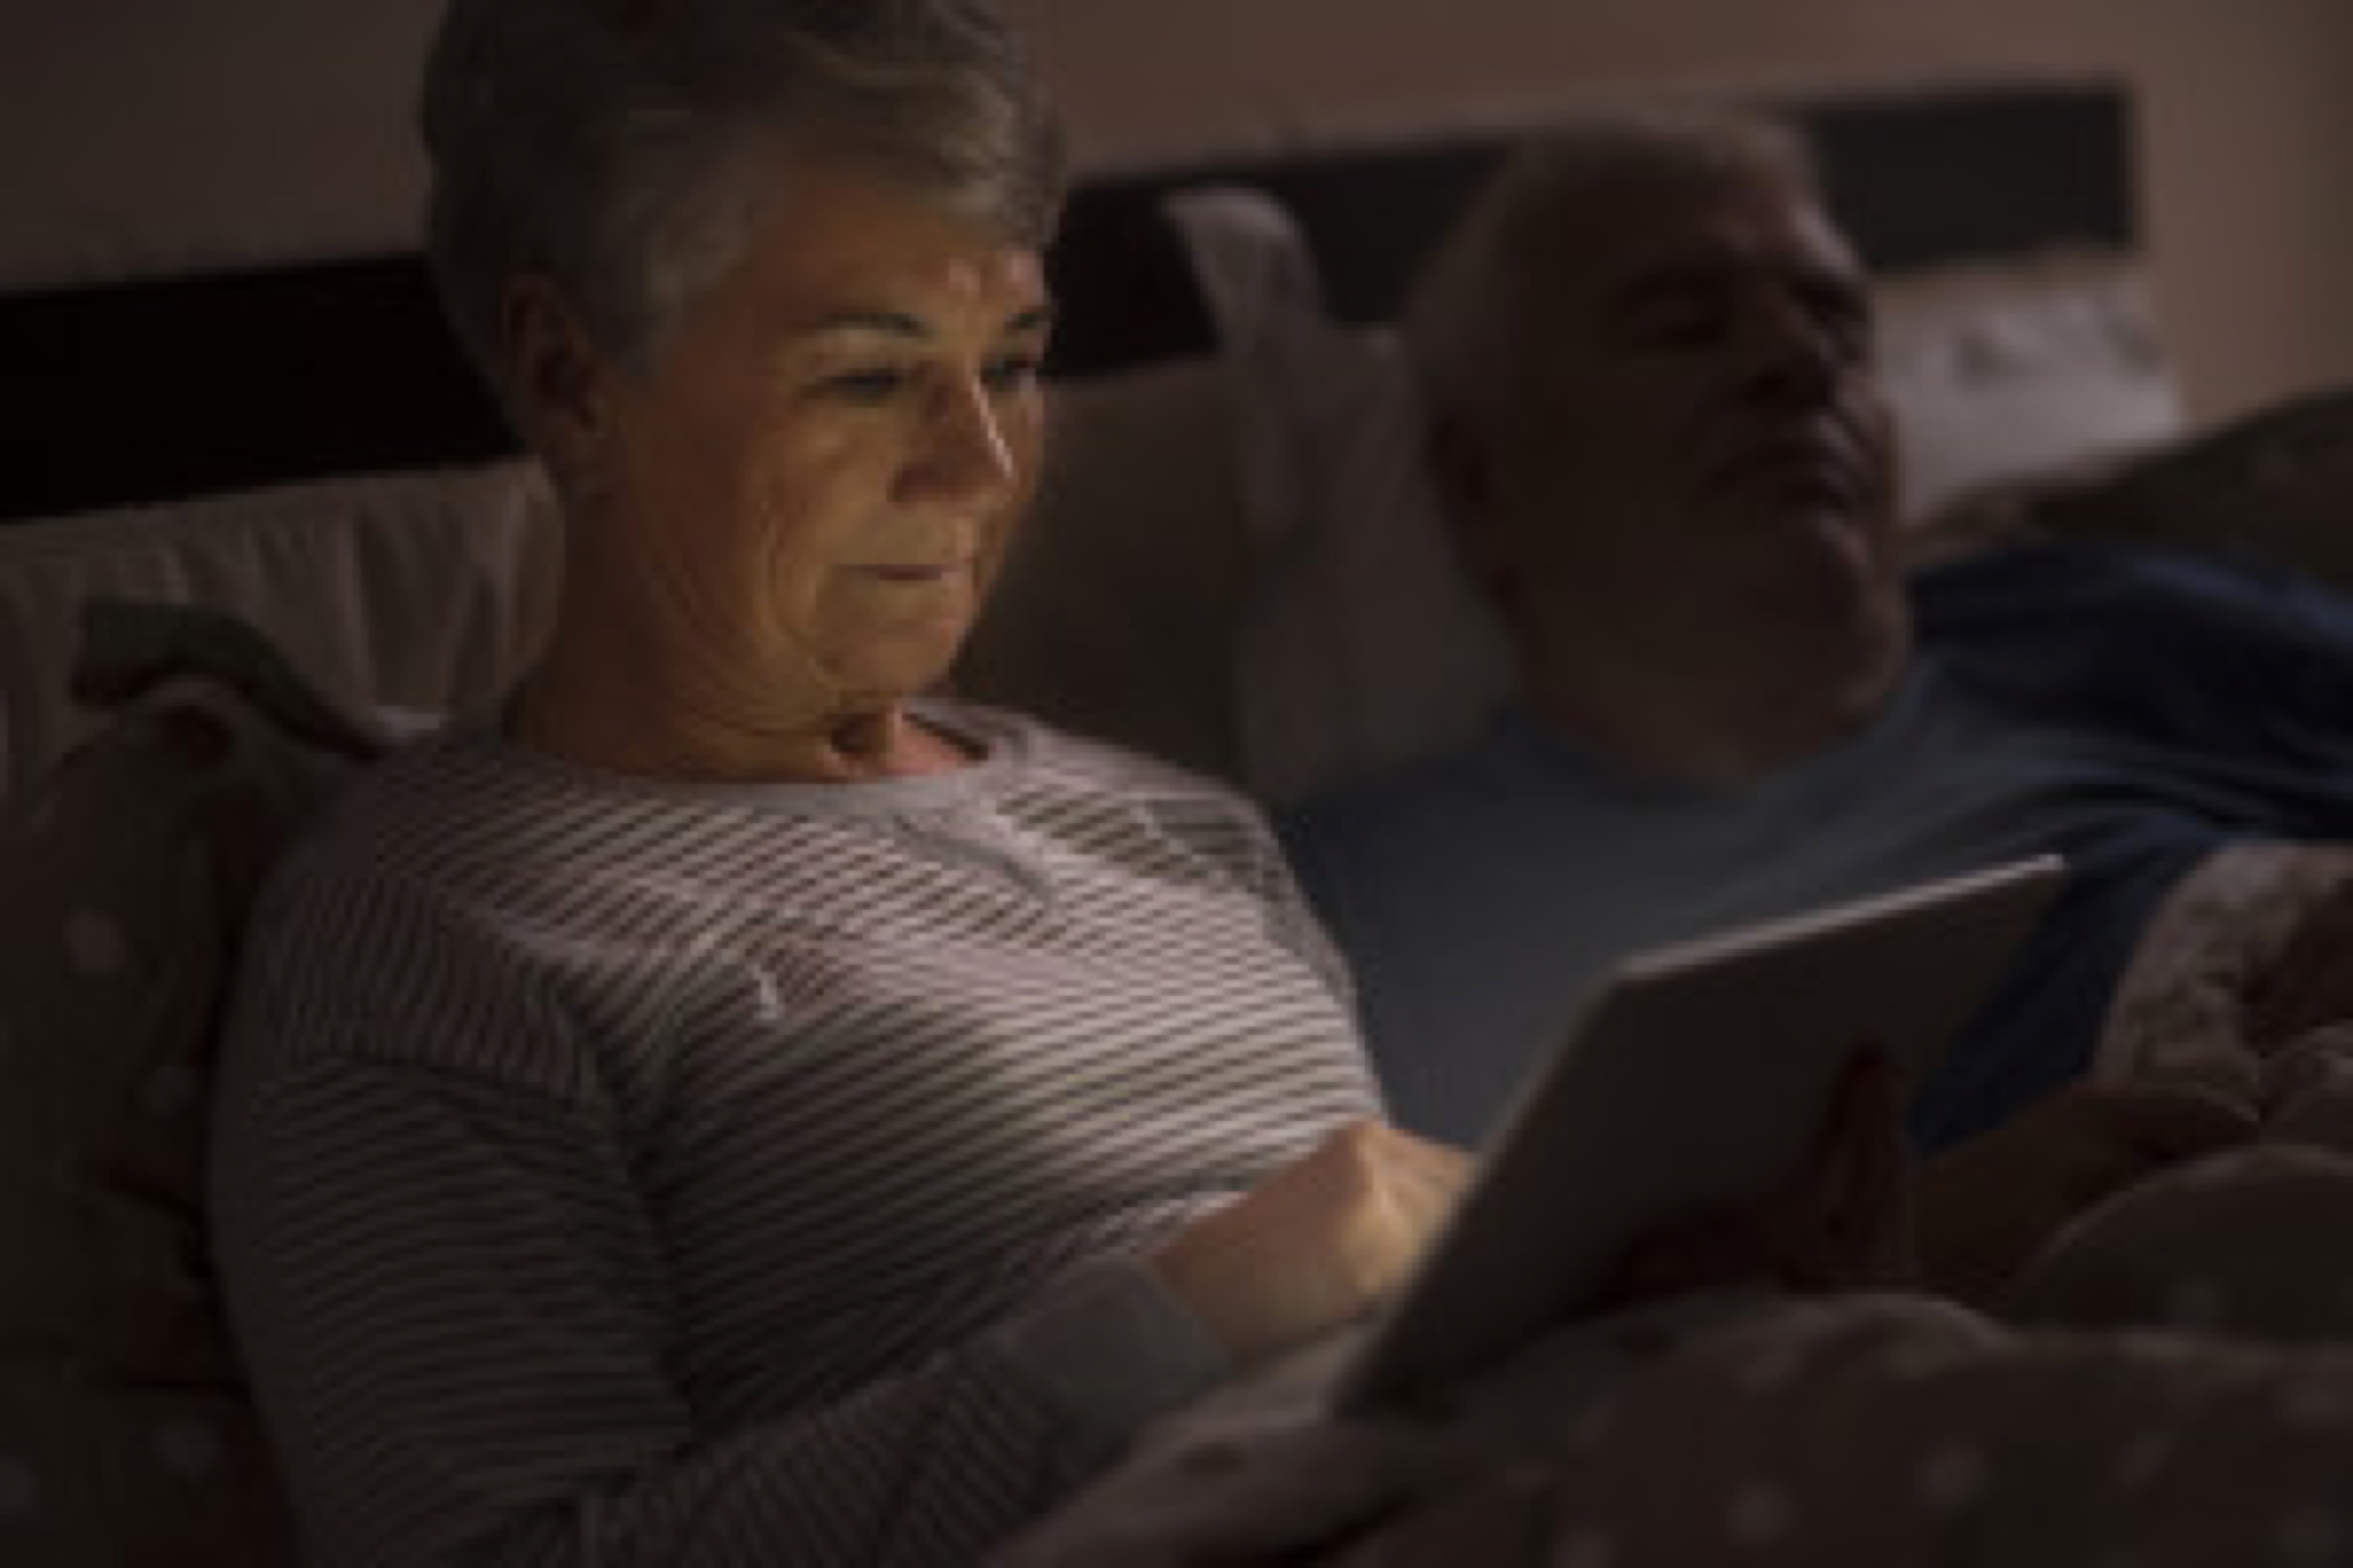 Grandmother browsing the Internet late at the night